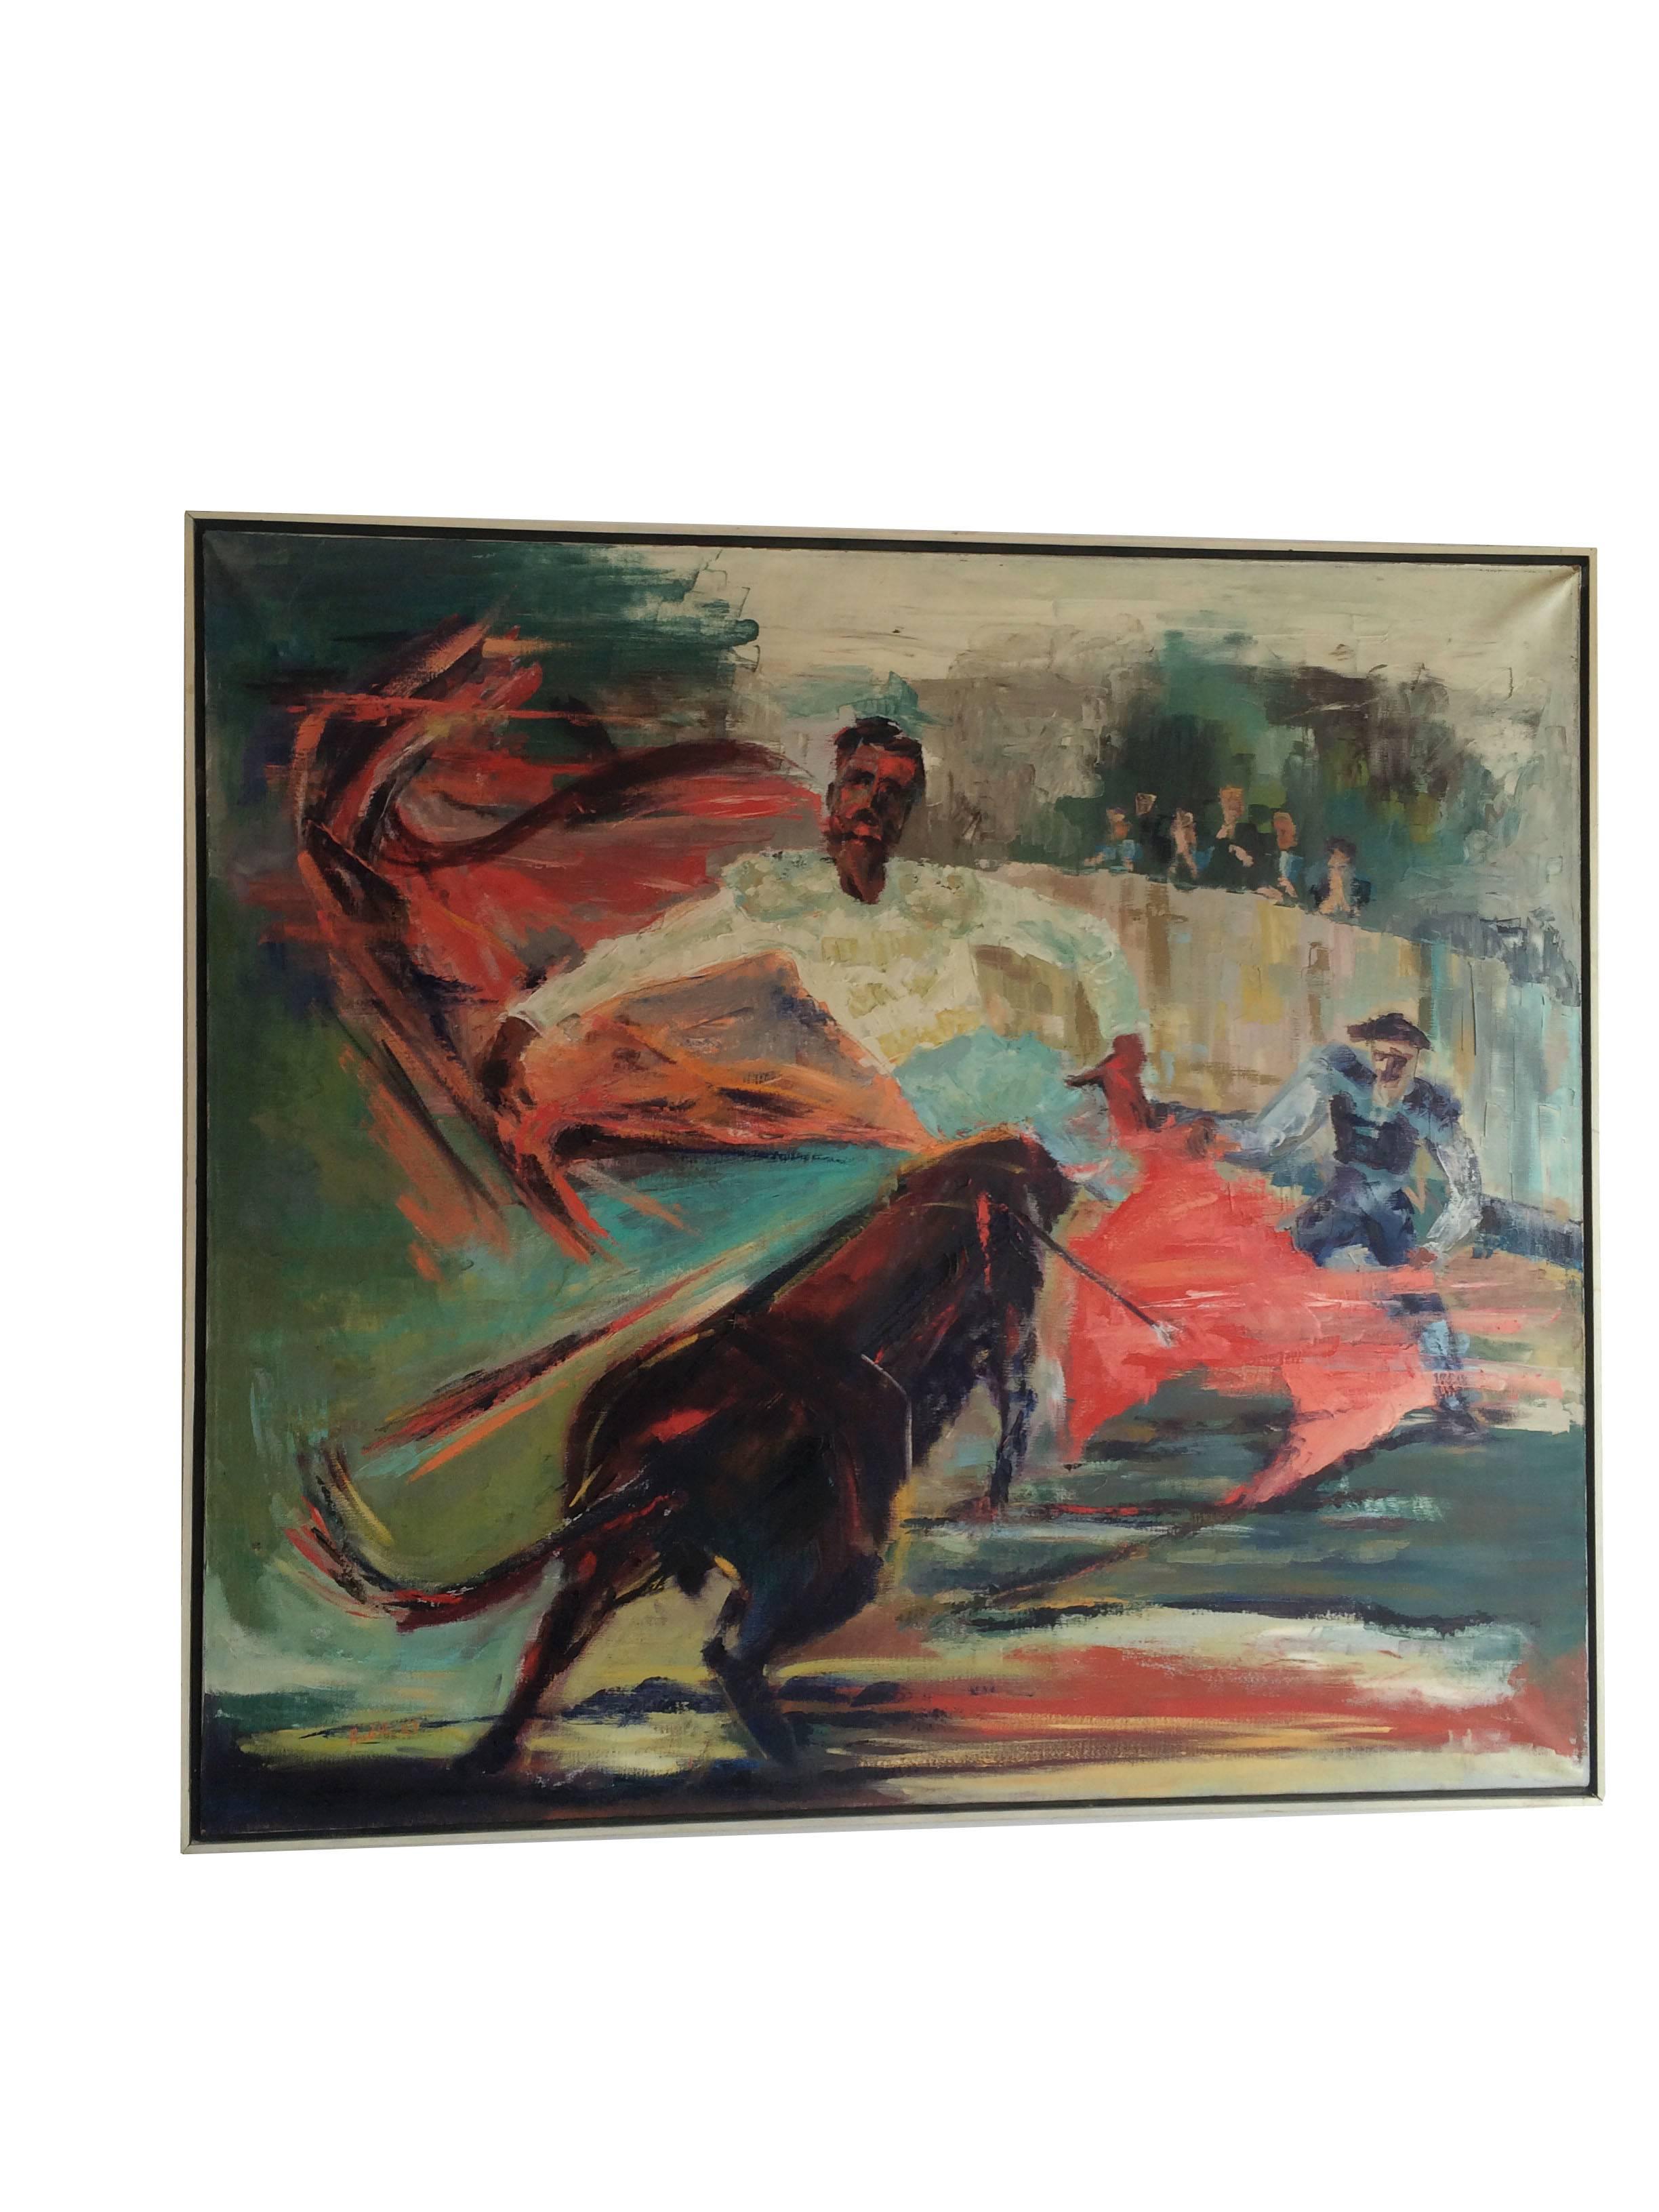 Framed, expressionist, oil painting on linen, depicting a matador in the ring signed by the artist Margorie Romynus.